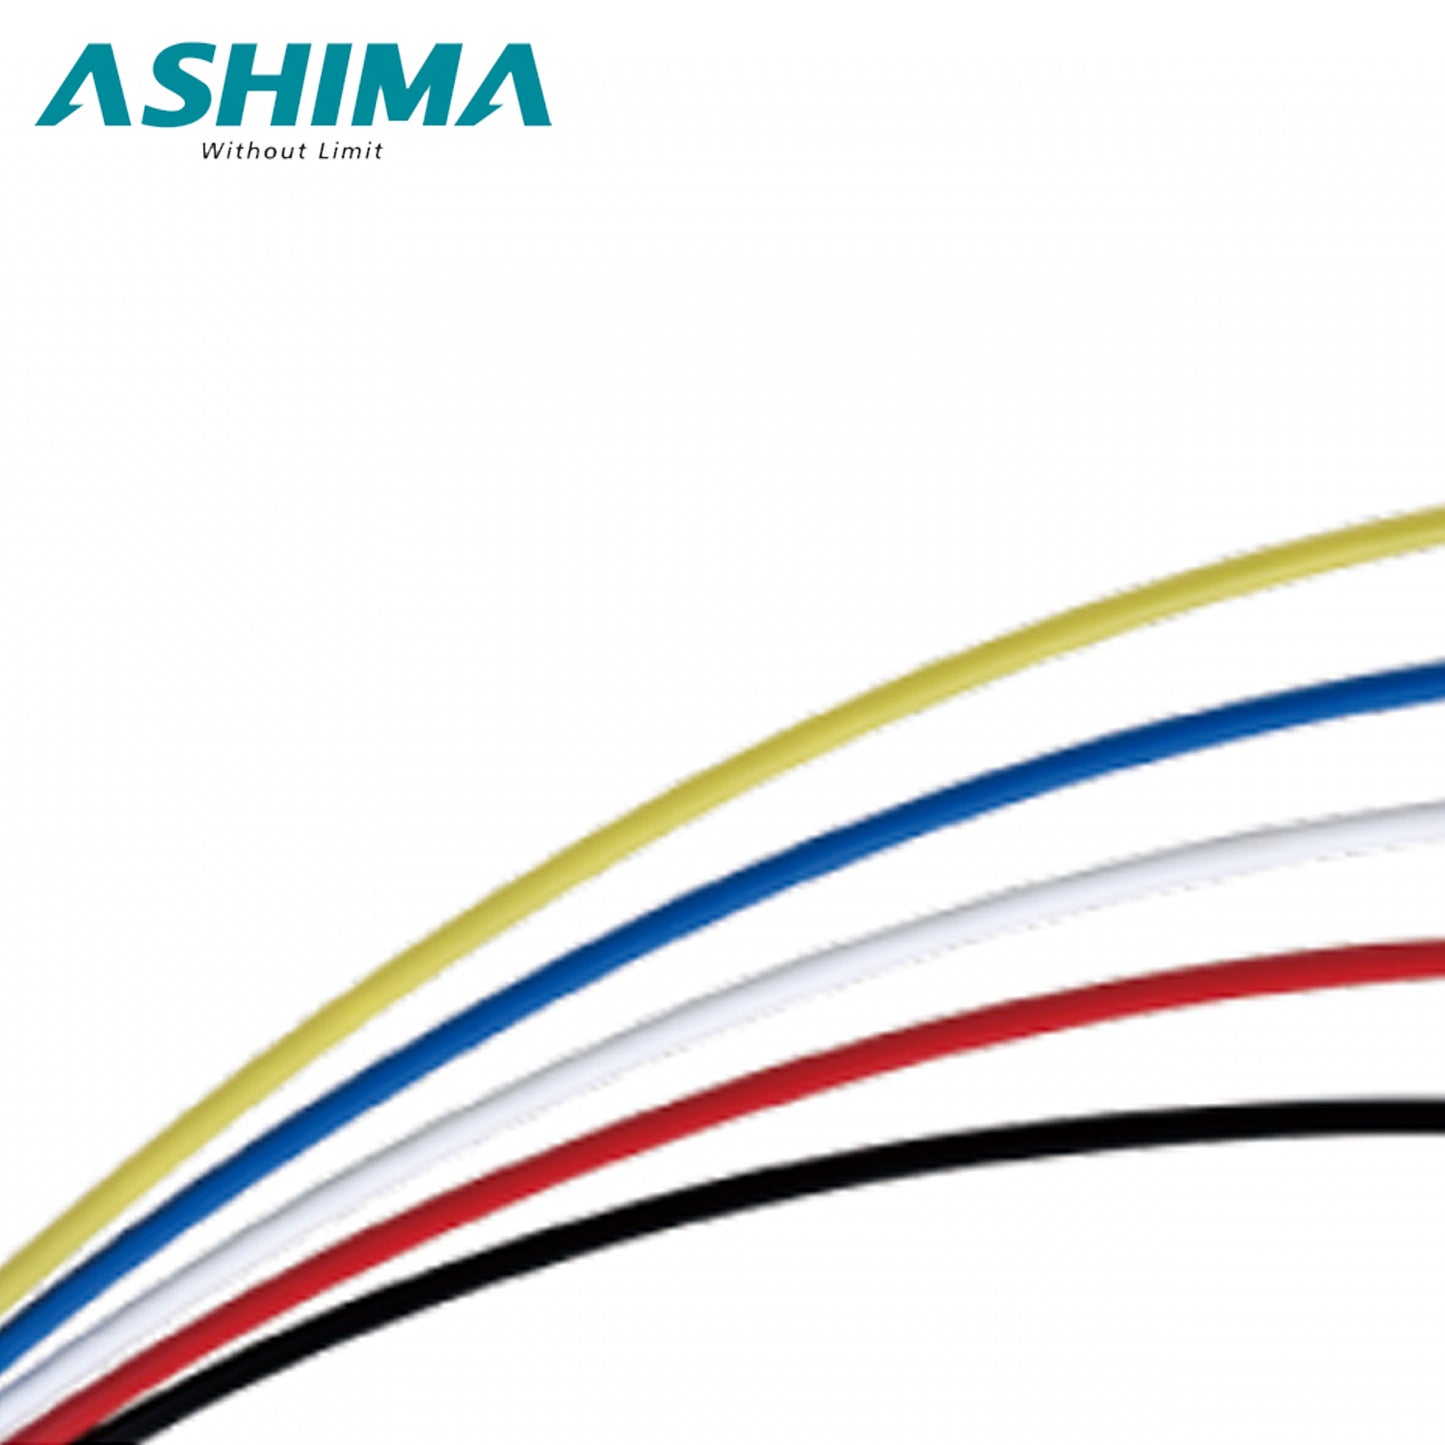 Ashima Action Performance Cables MTB/Road Outer Casing 7.5M - Black